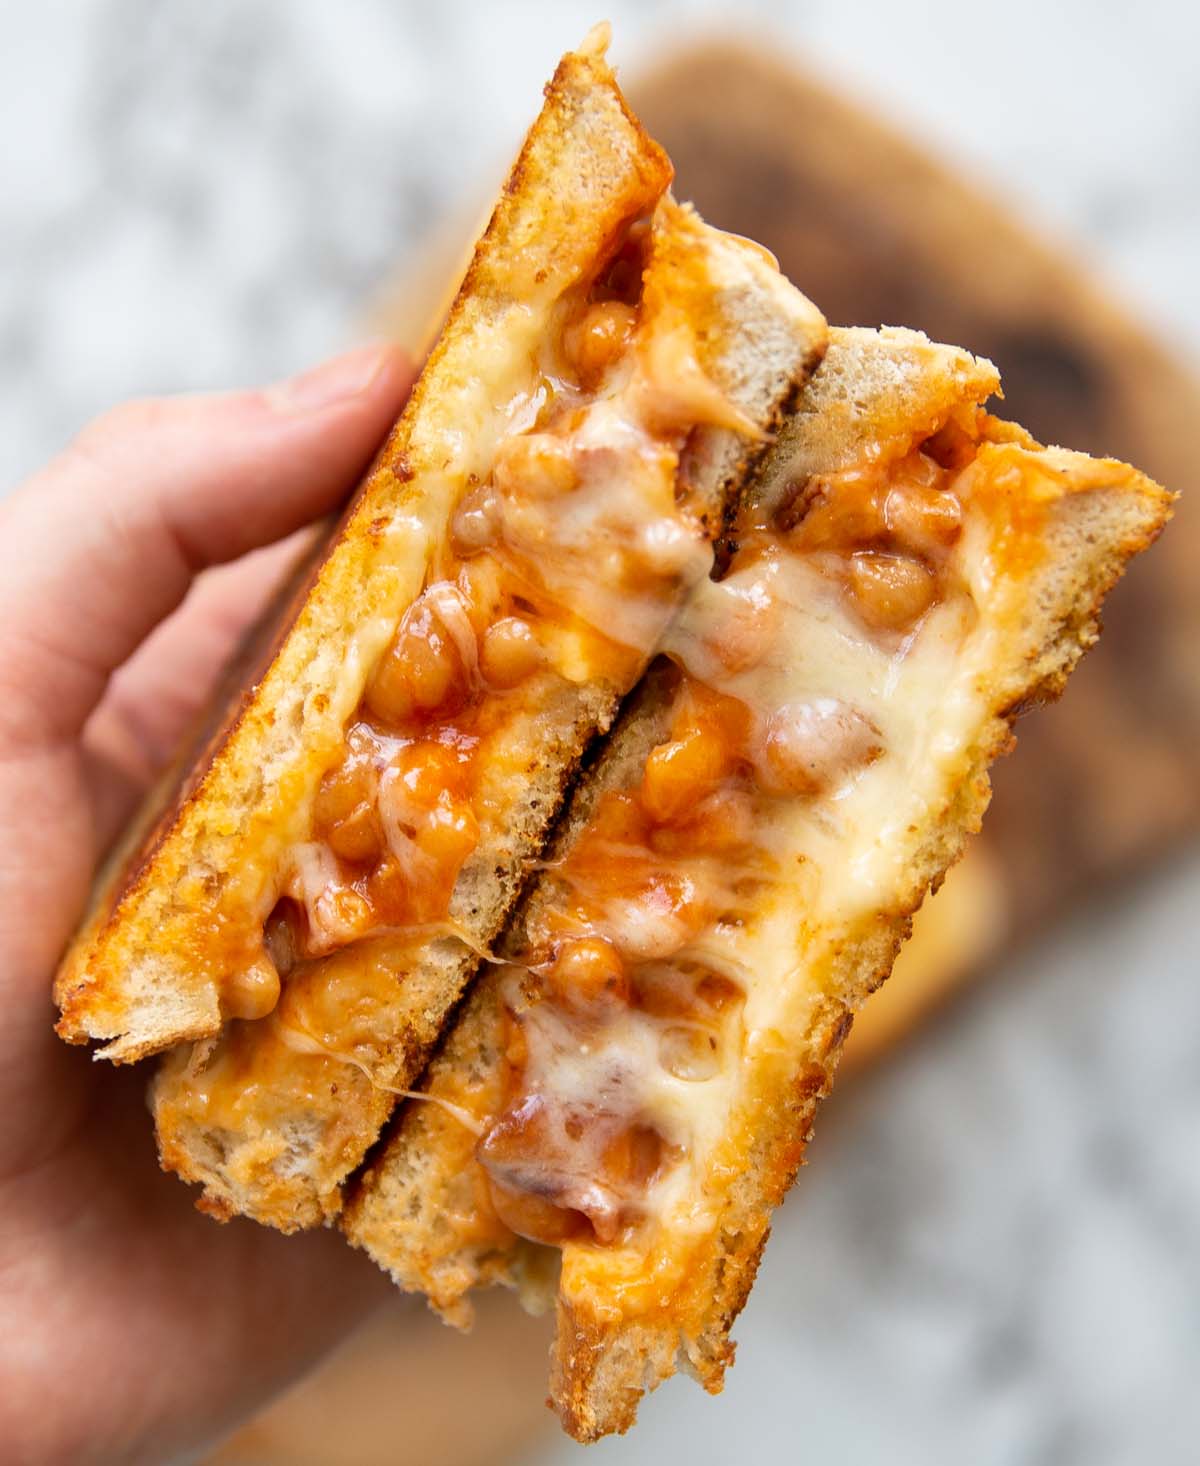 Bean and cheese toasties